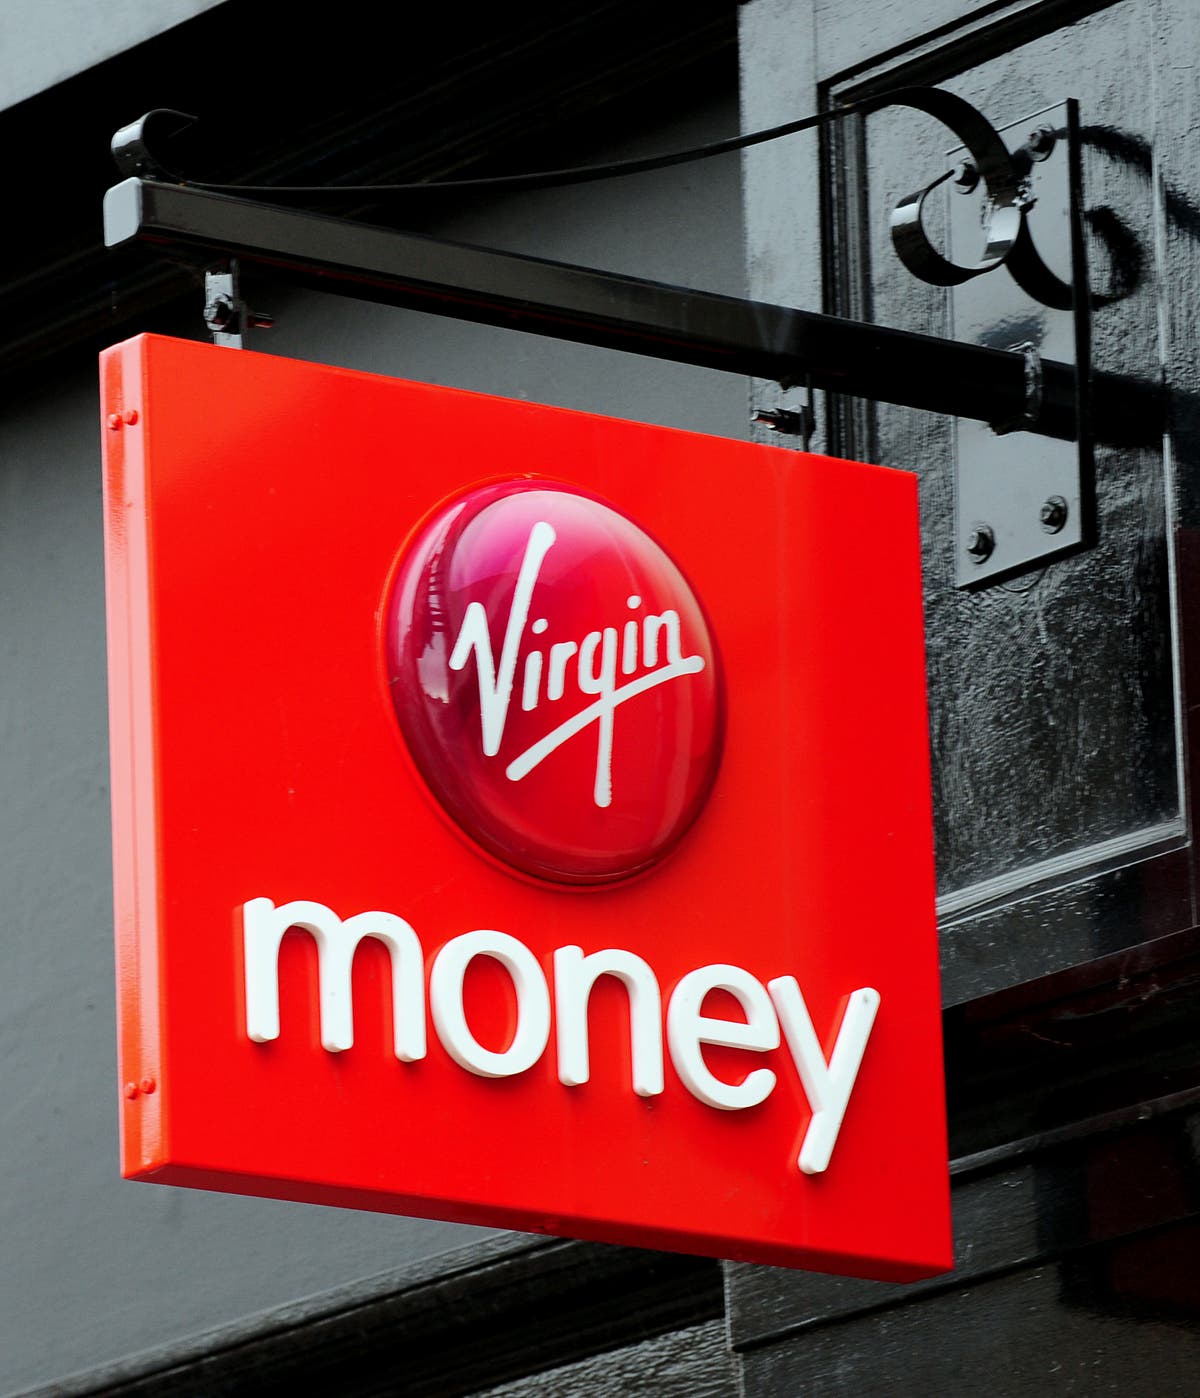 Cancer support service rolled out by Virgin Money